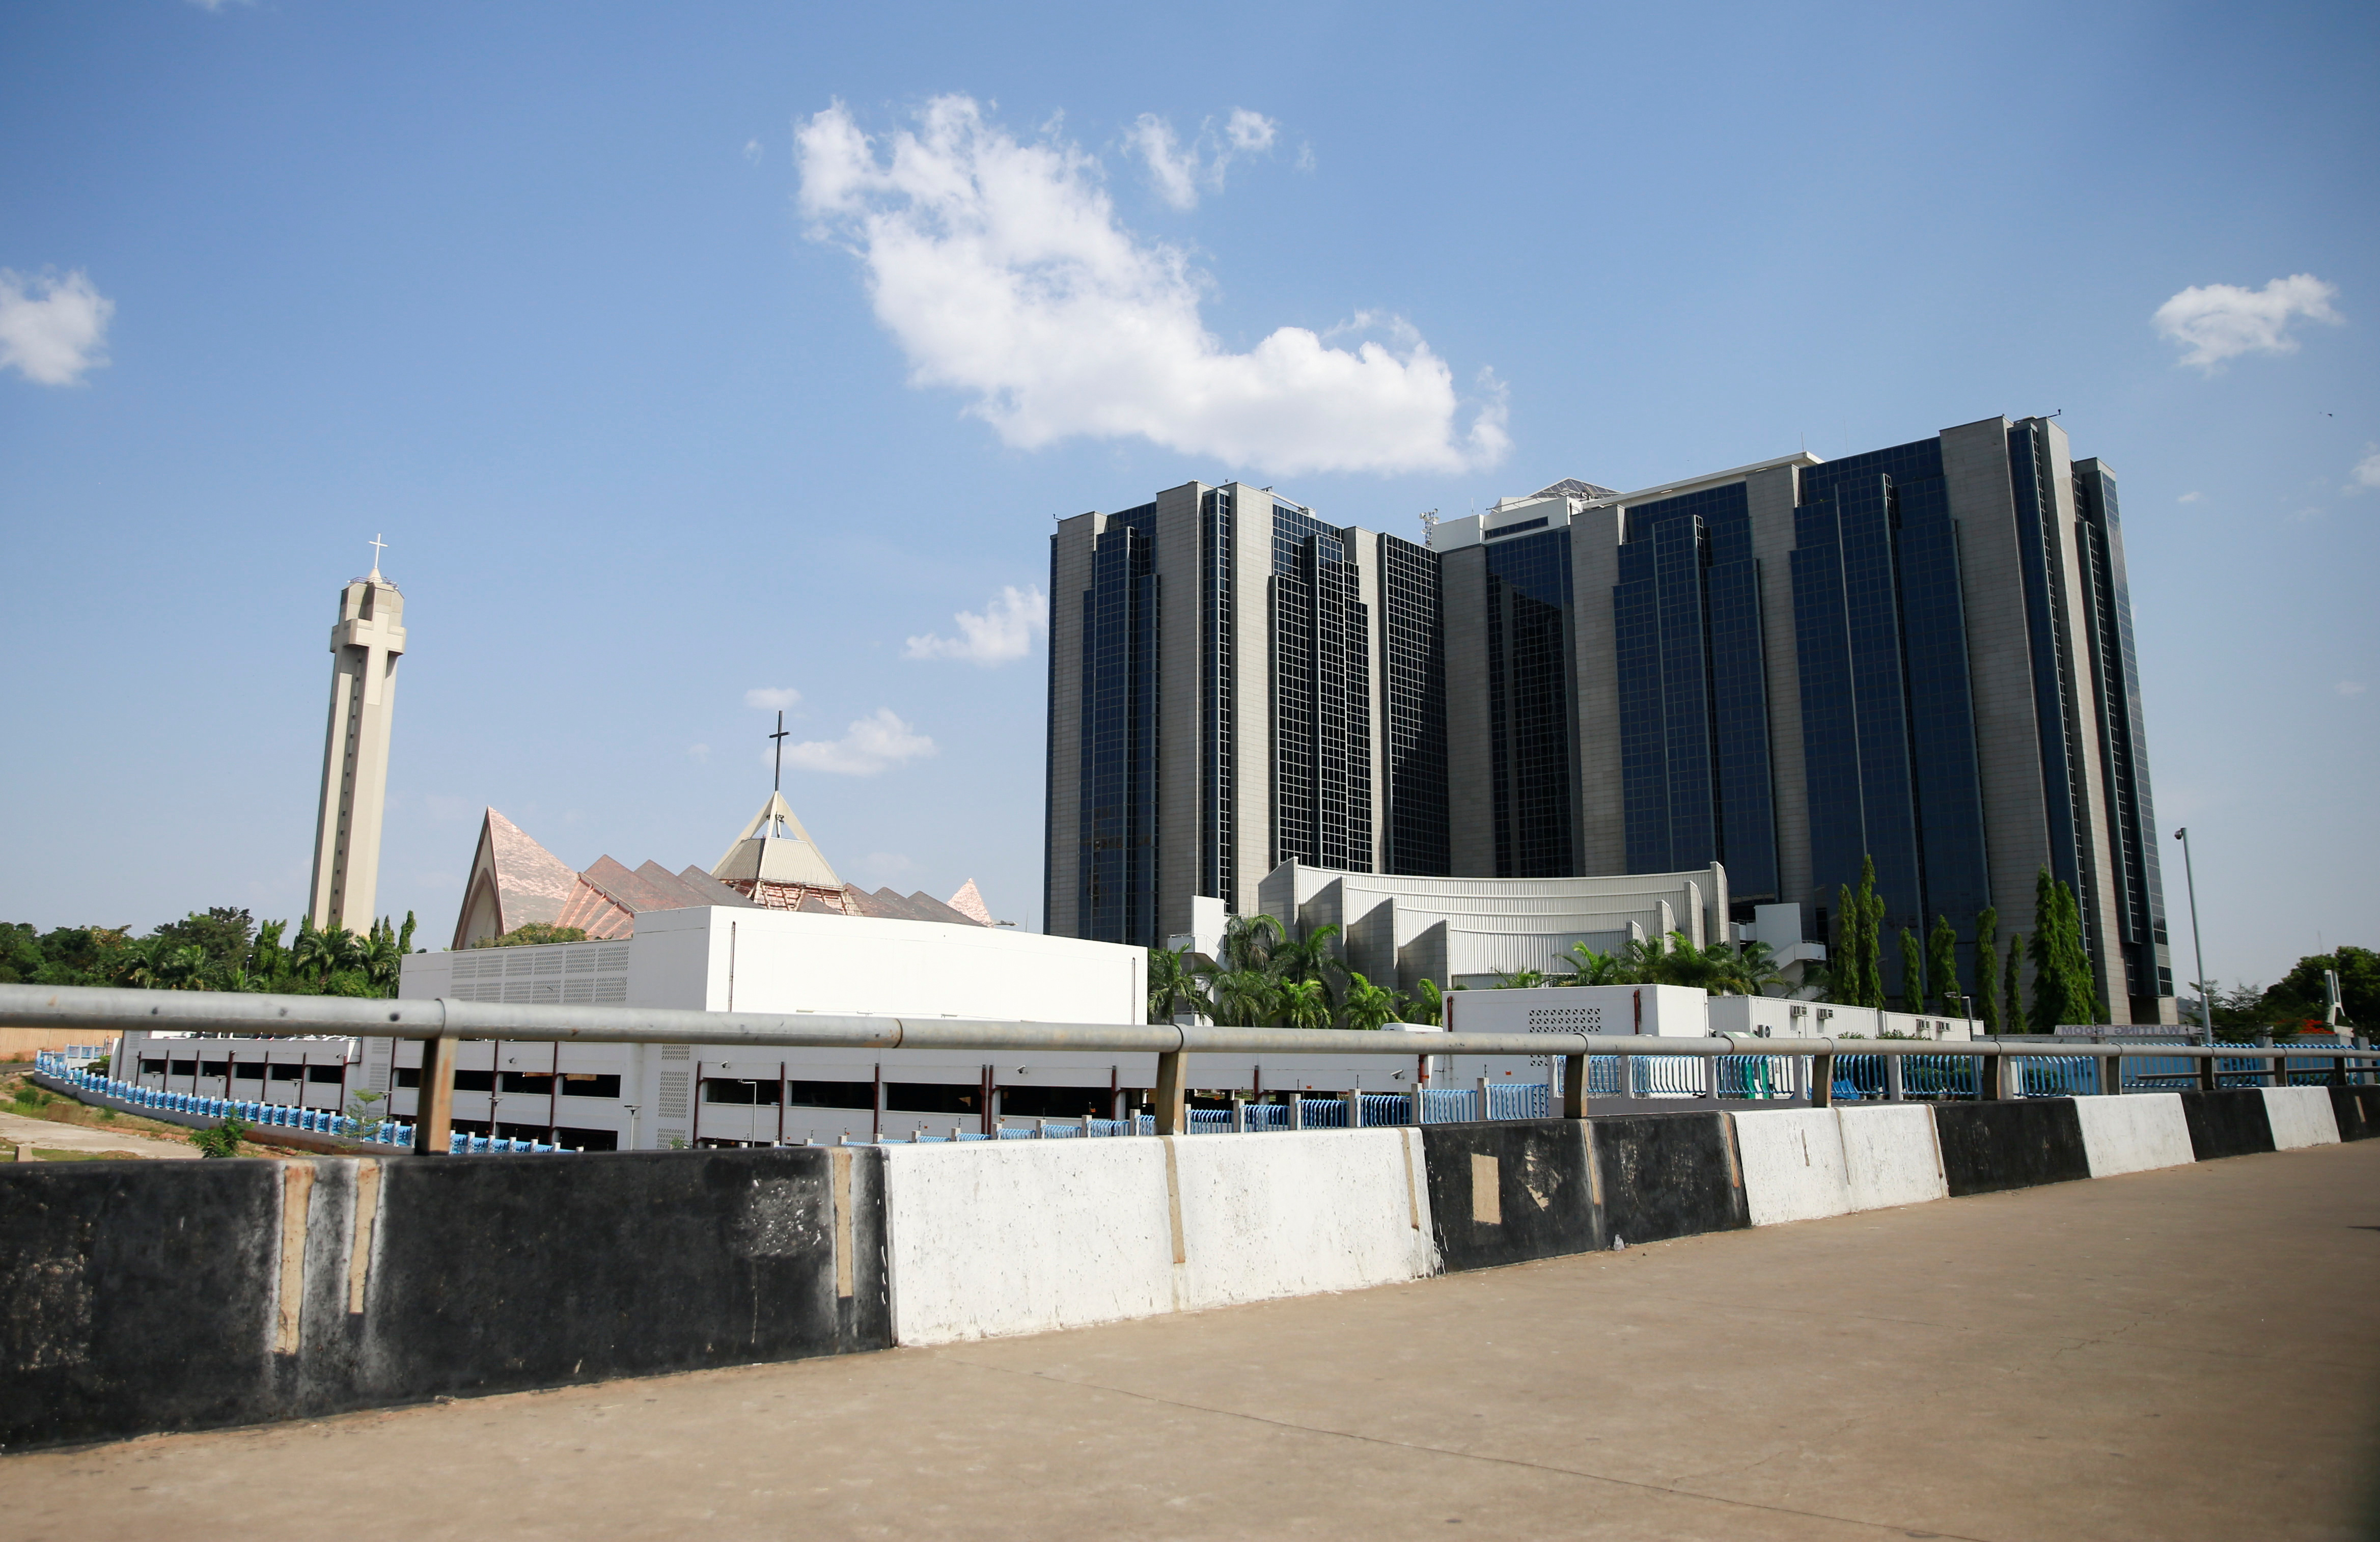 A view of Central Bank of Nigeria headquaters next to National Ecumenical Centre in Abuja